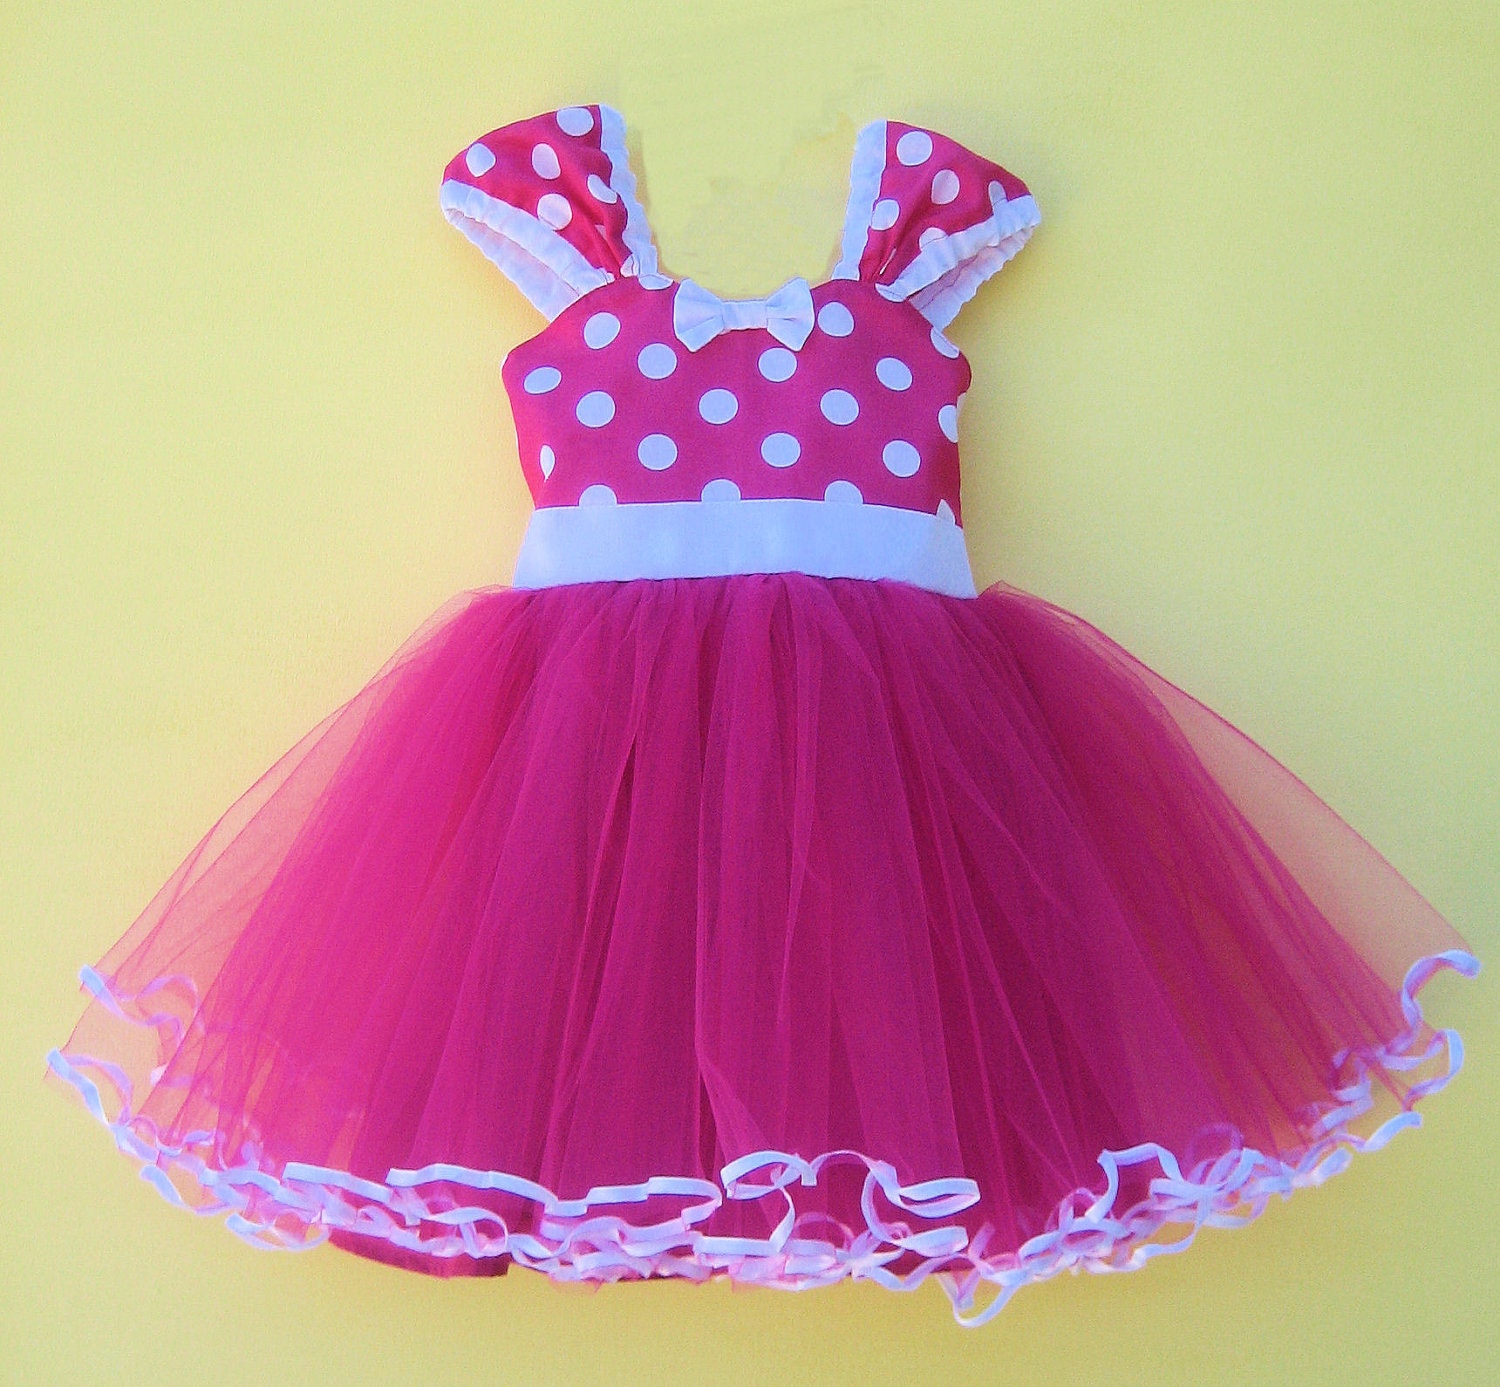 MINNIE MOUSE costume dress Tutu Party Dress in Hot pink | Etsy